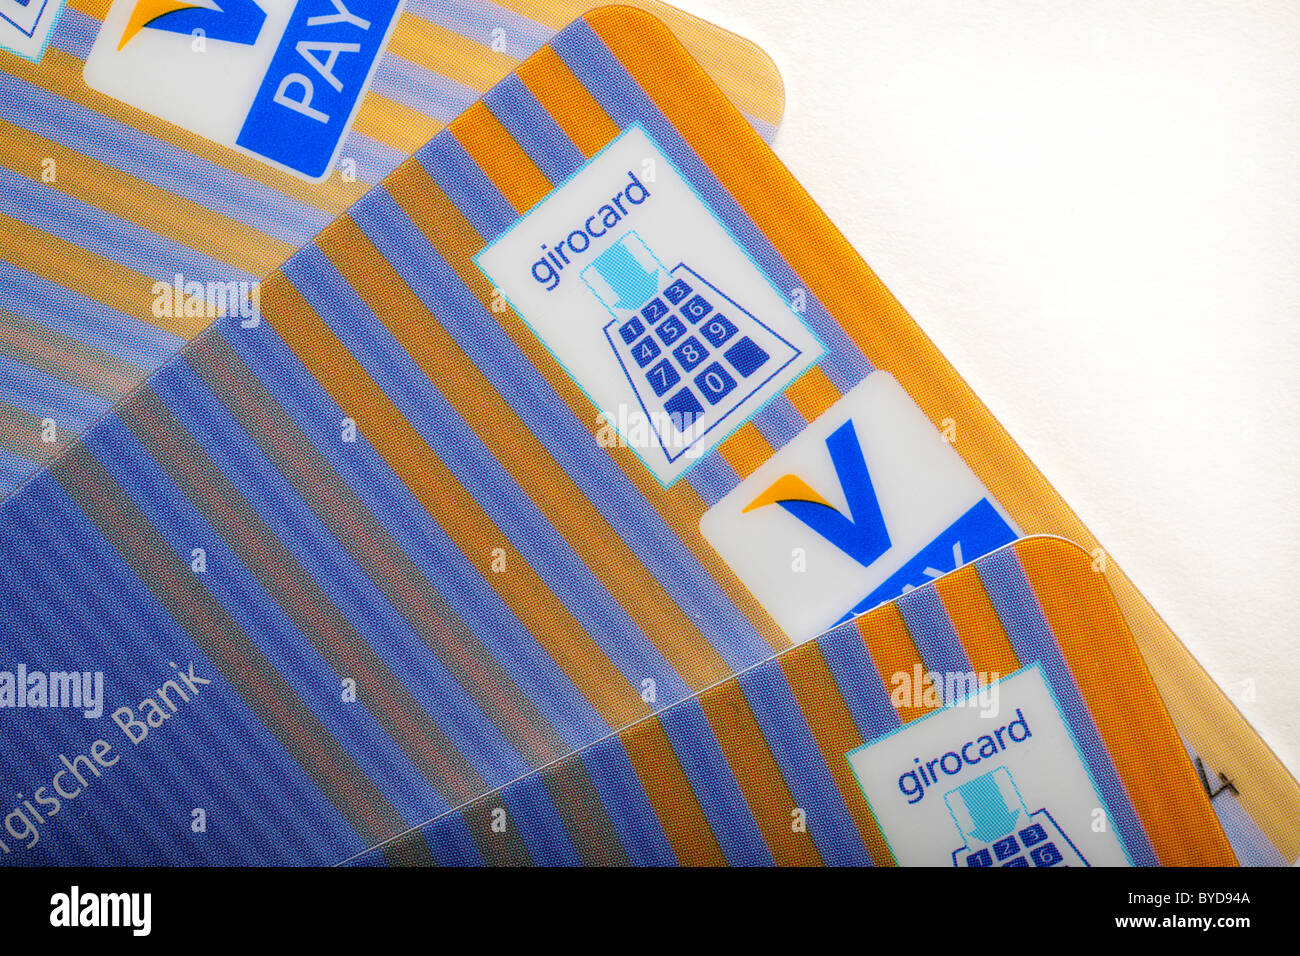 Cash cards, debit cards, current account bank cards with the latest icons, V-PAY, VPAY, girocard Stock Photo